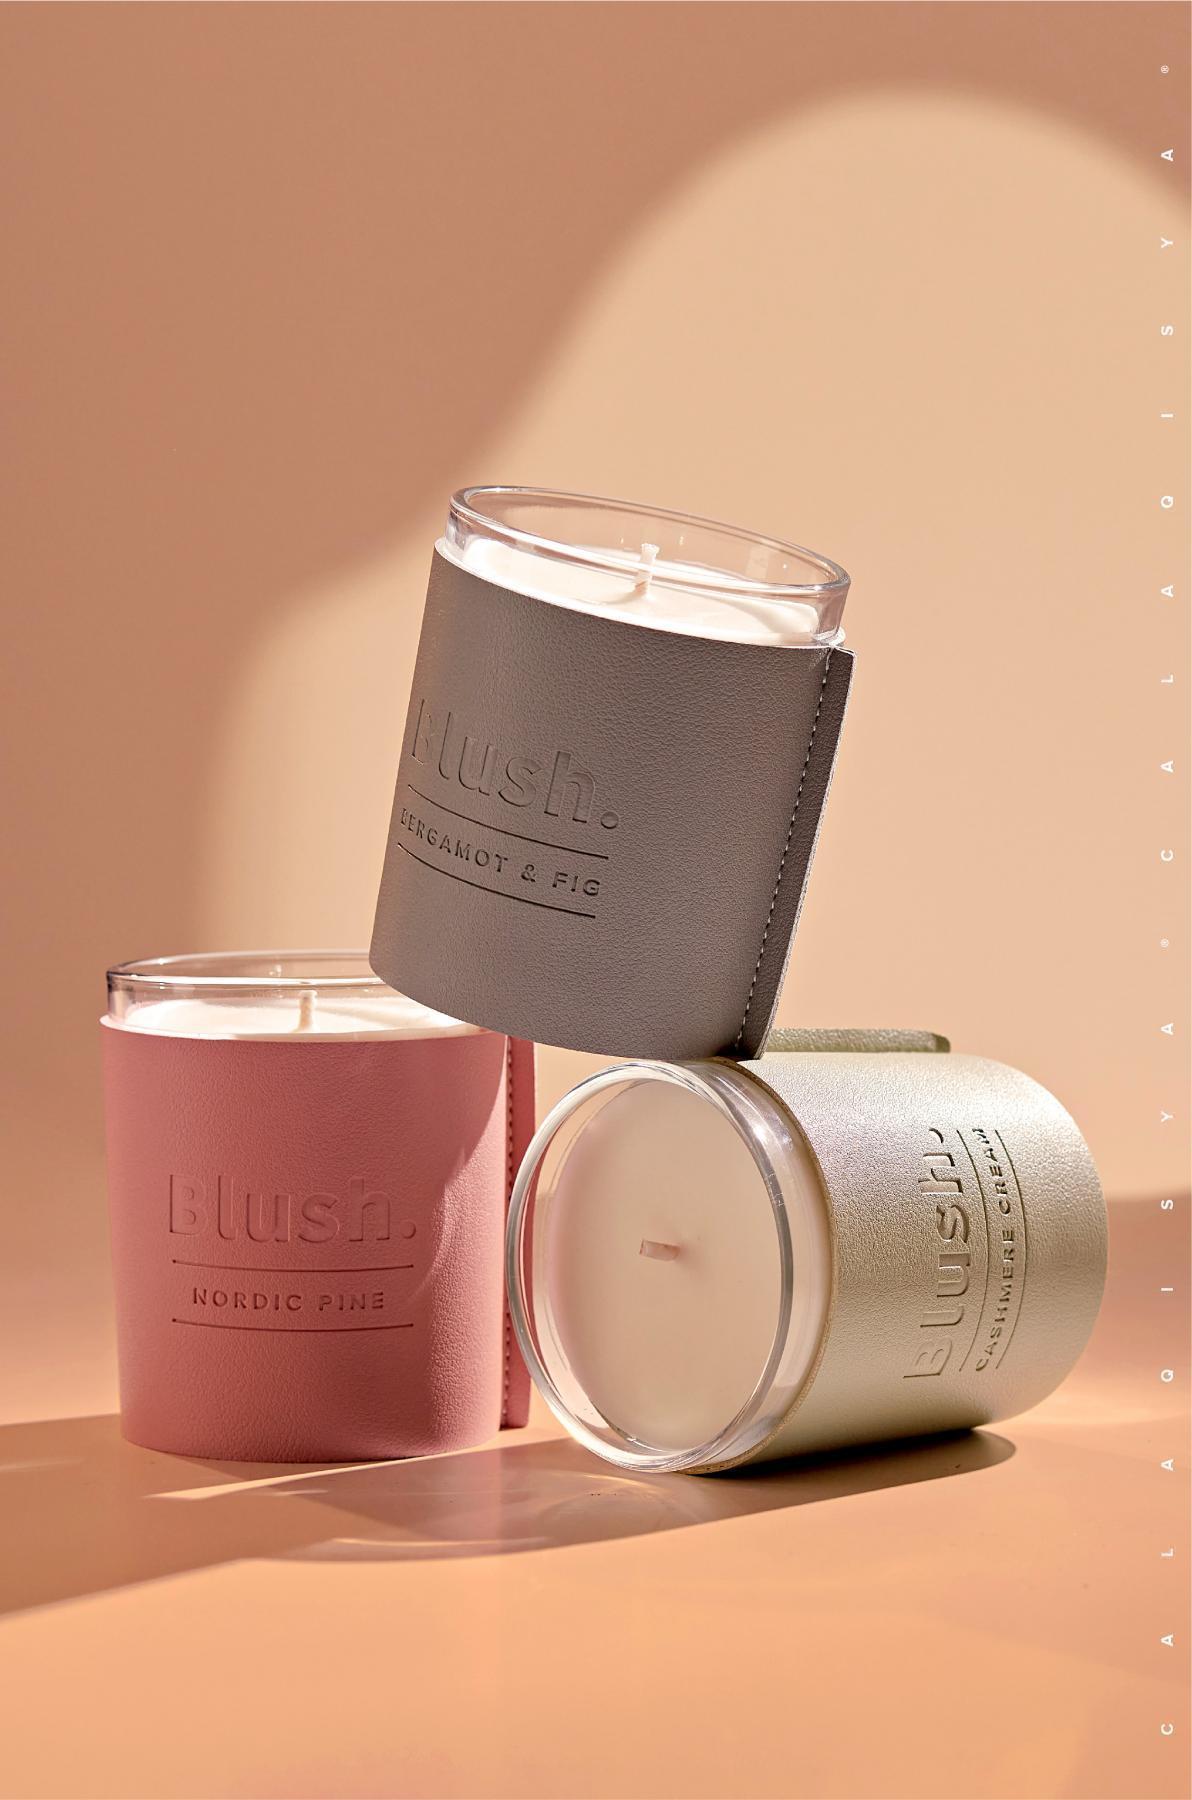 BLUSH SCENTED CANDLE IN NORDIC PINE